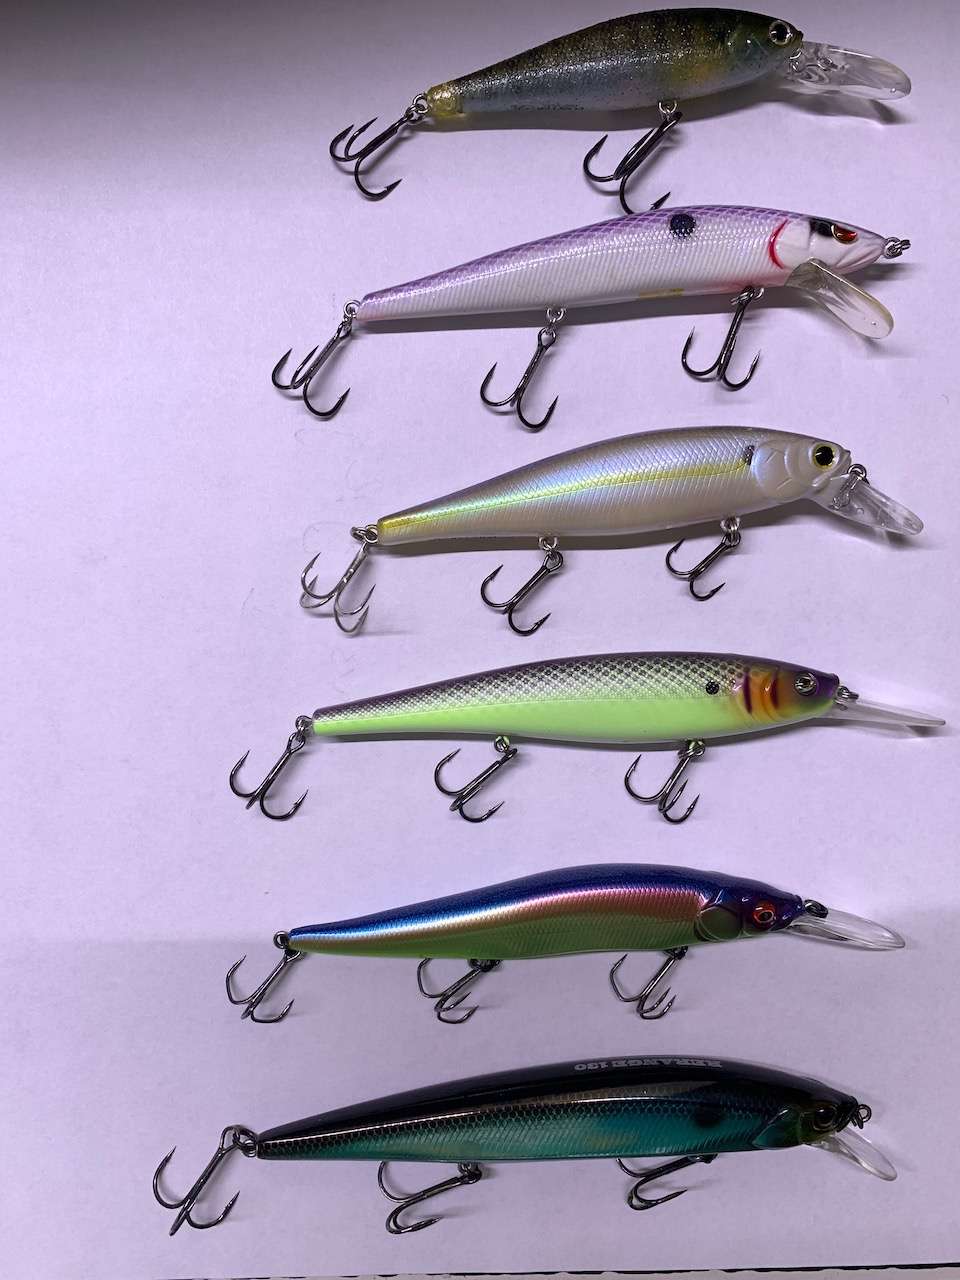 Looking to expand jerkbaits - Fishing Tackle - Bass Fishing Forums